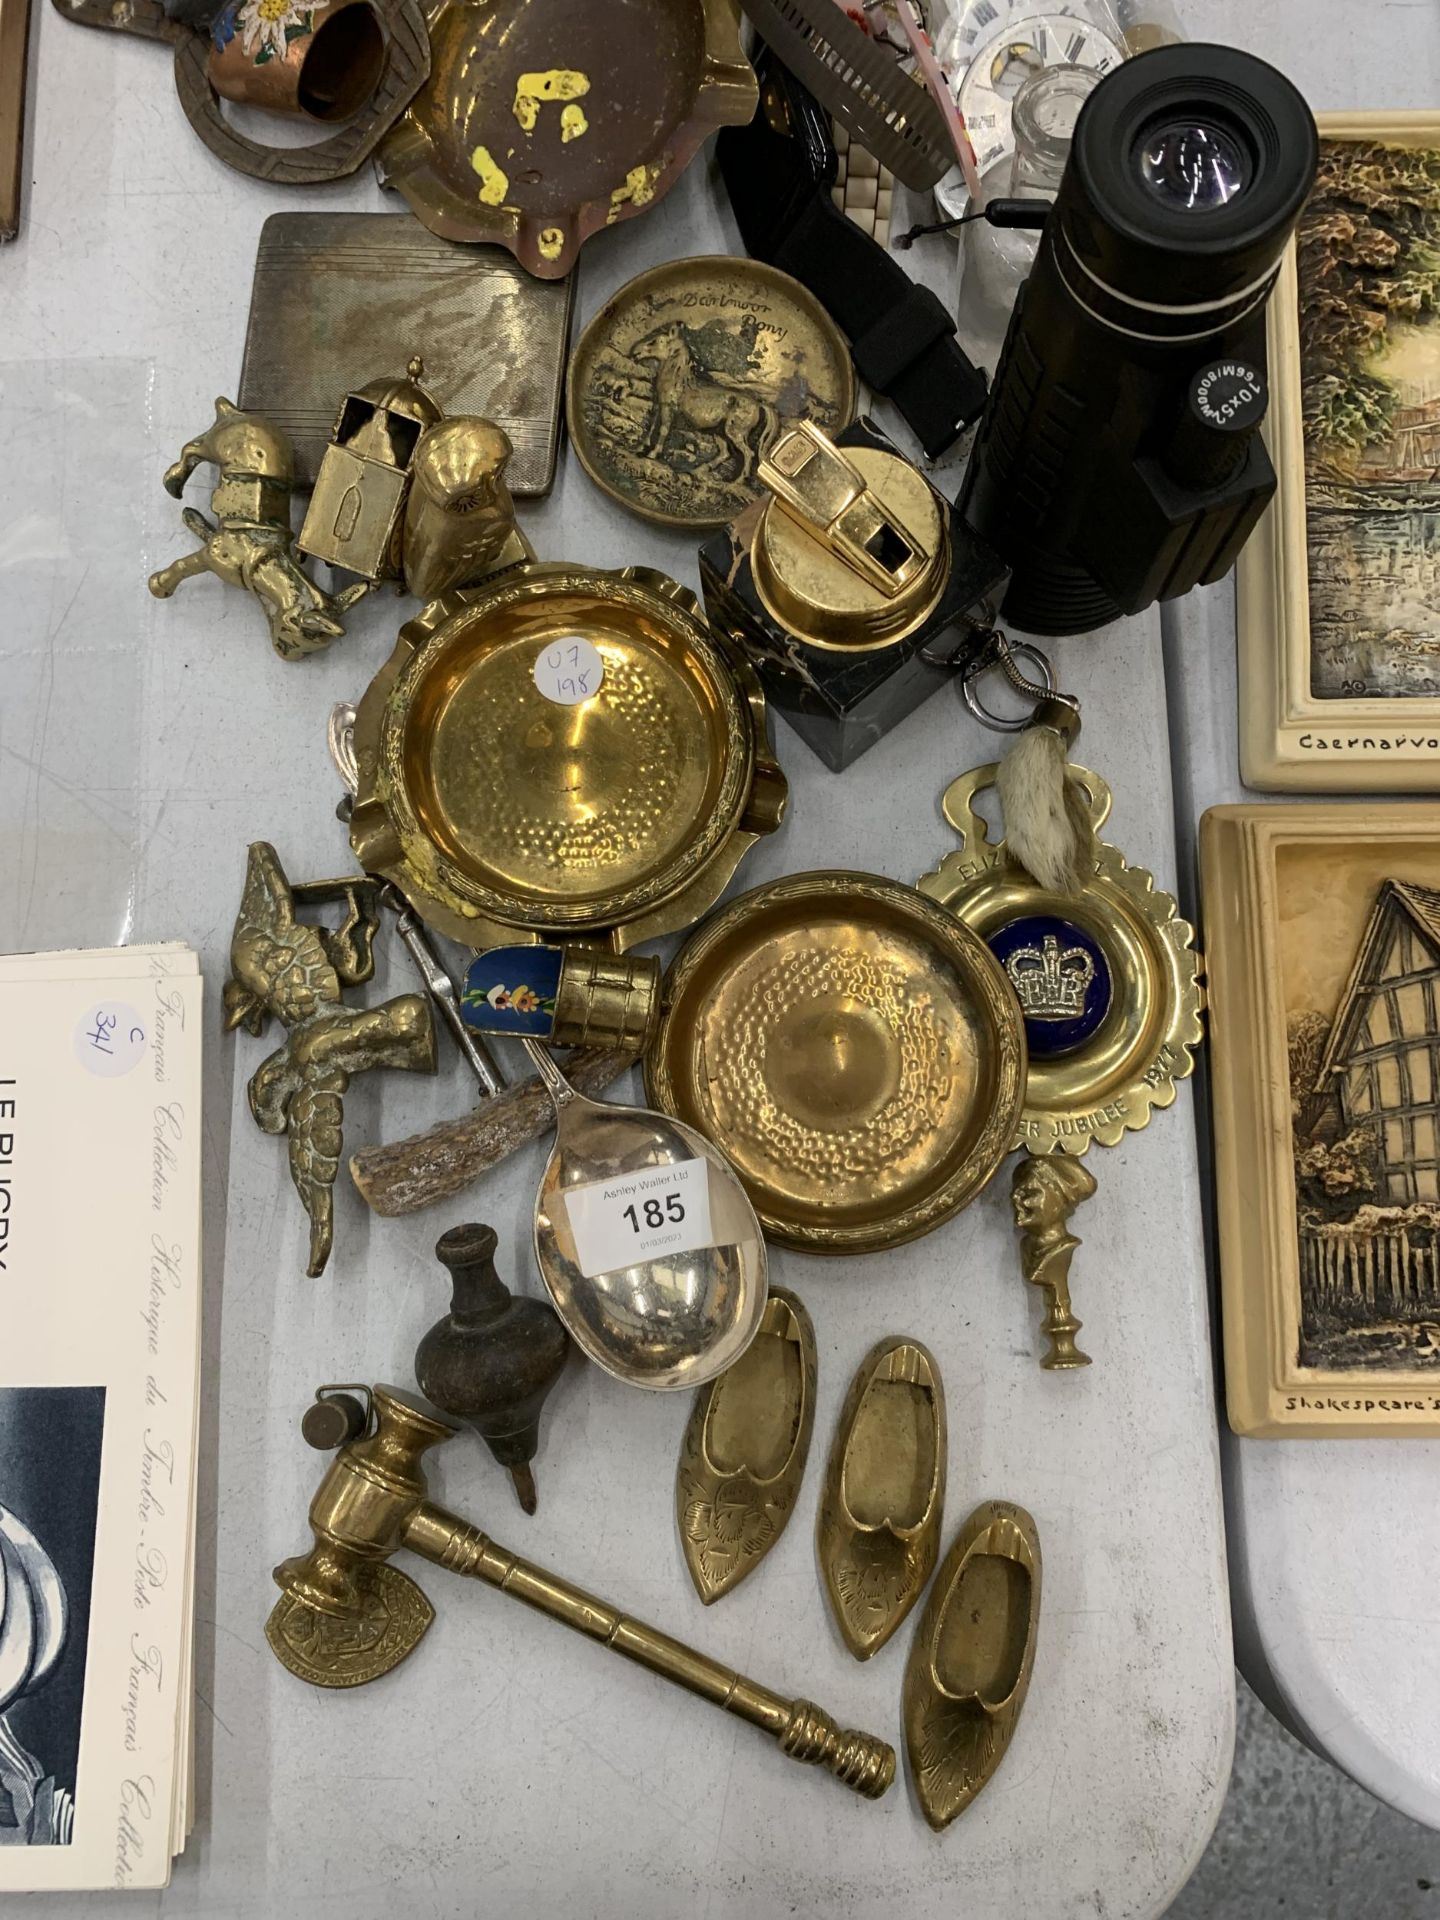 A LARGE COLLECTION OF BRASS ITEMS TO INCLUDE BELLS, FIGURES, ETC PLUS WATCH FACES, A CIGARETTE CASE, - Image 3 of 14